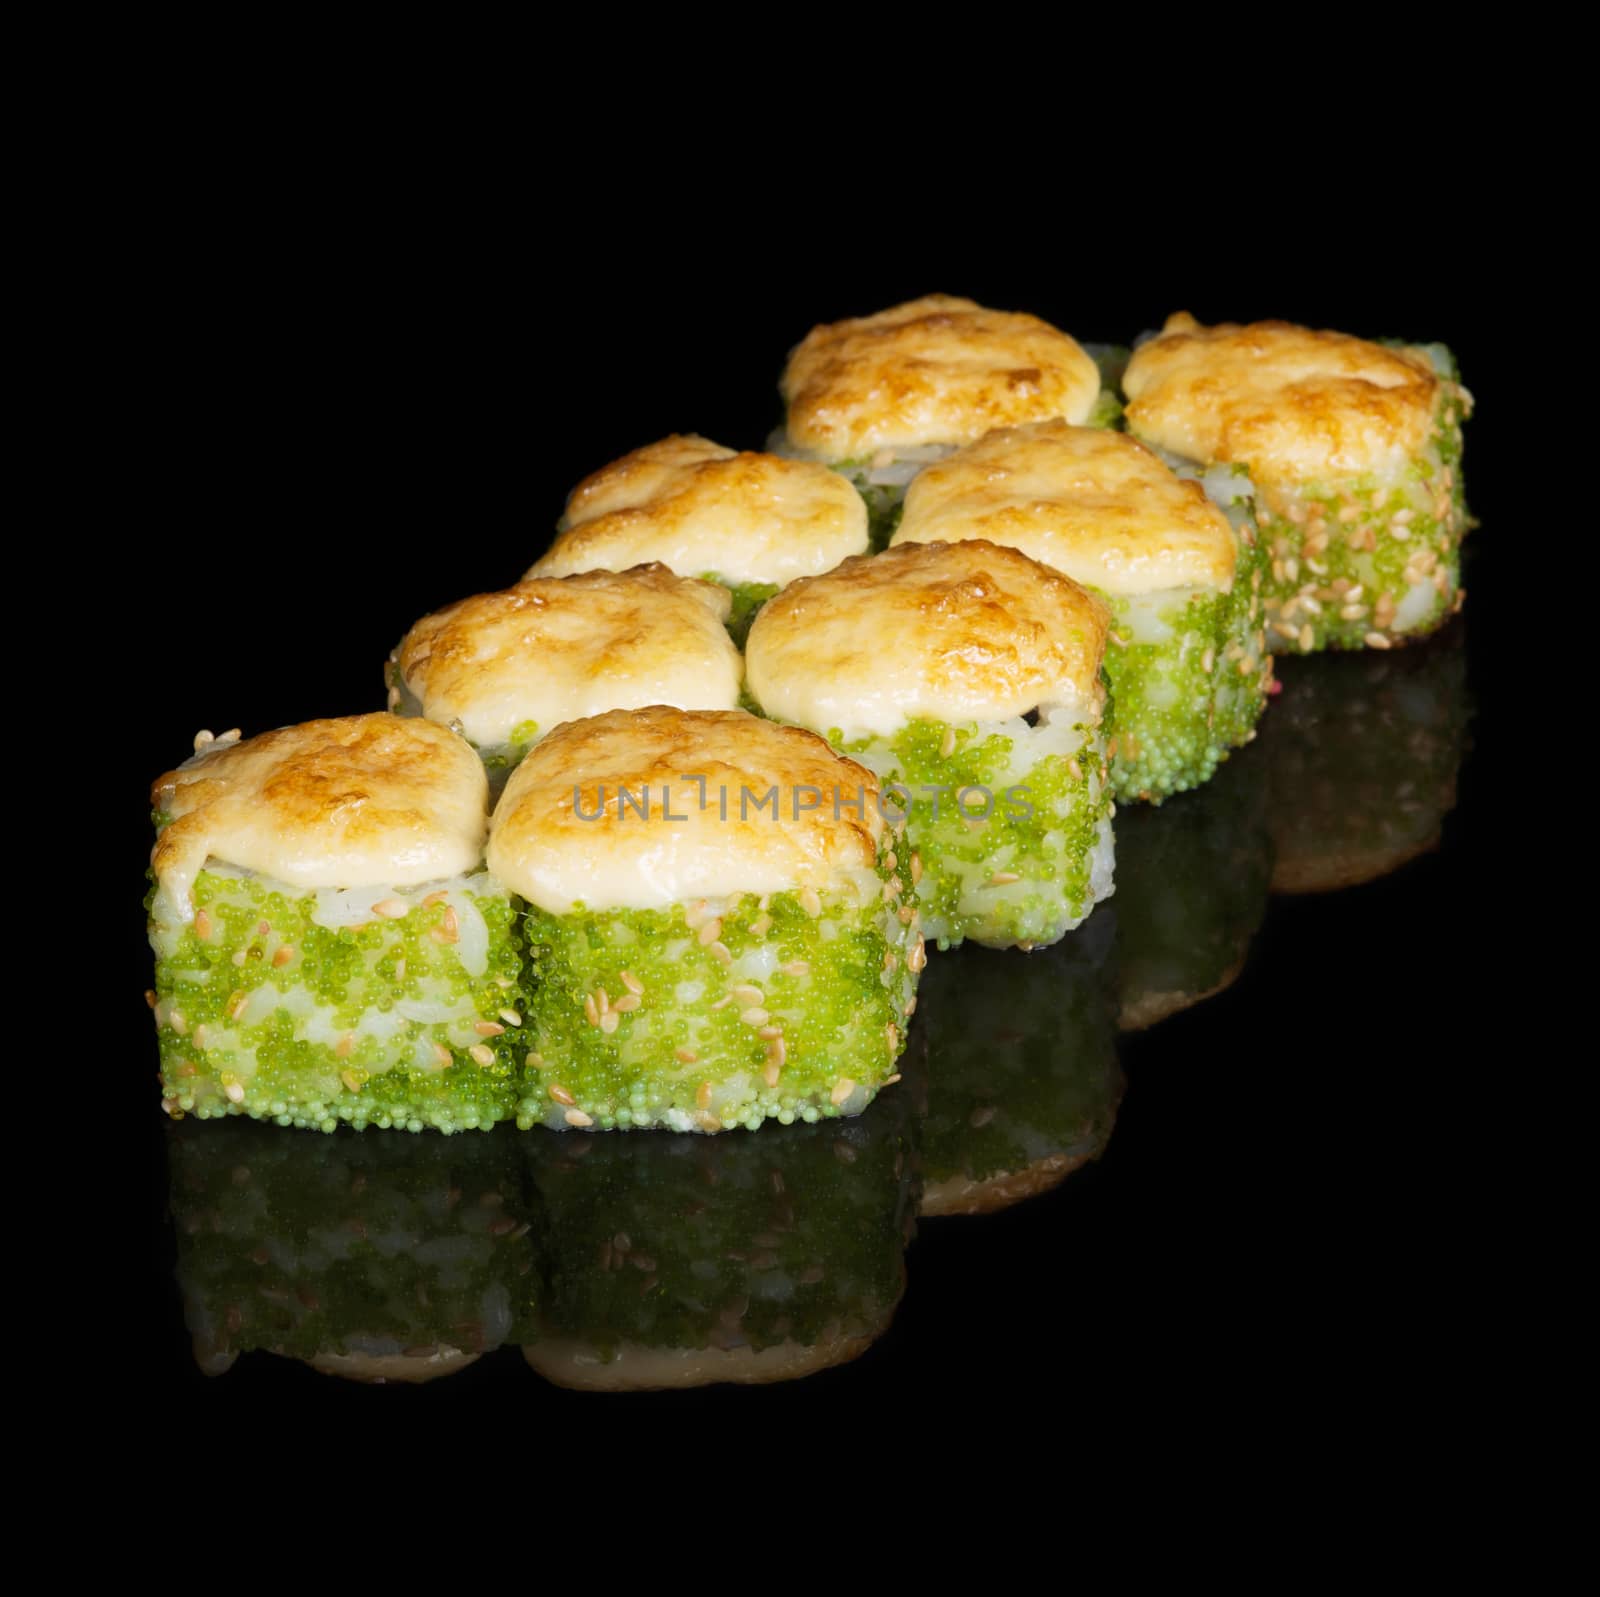 Grilled sushi rolls with caviar and cheese by kzen